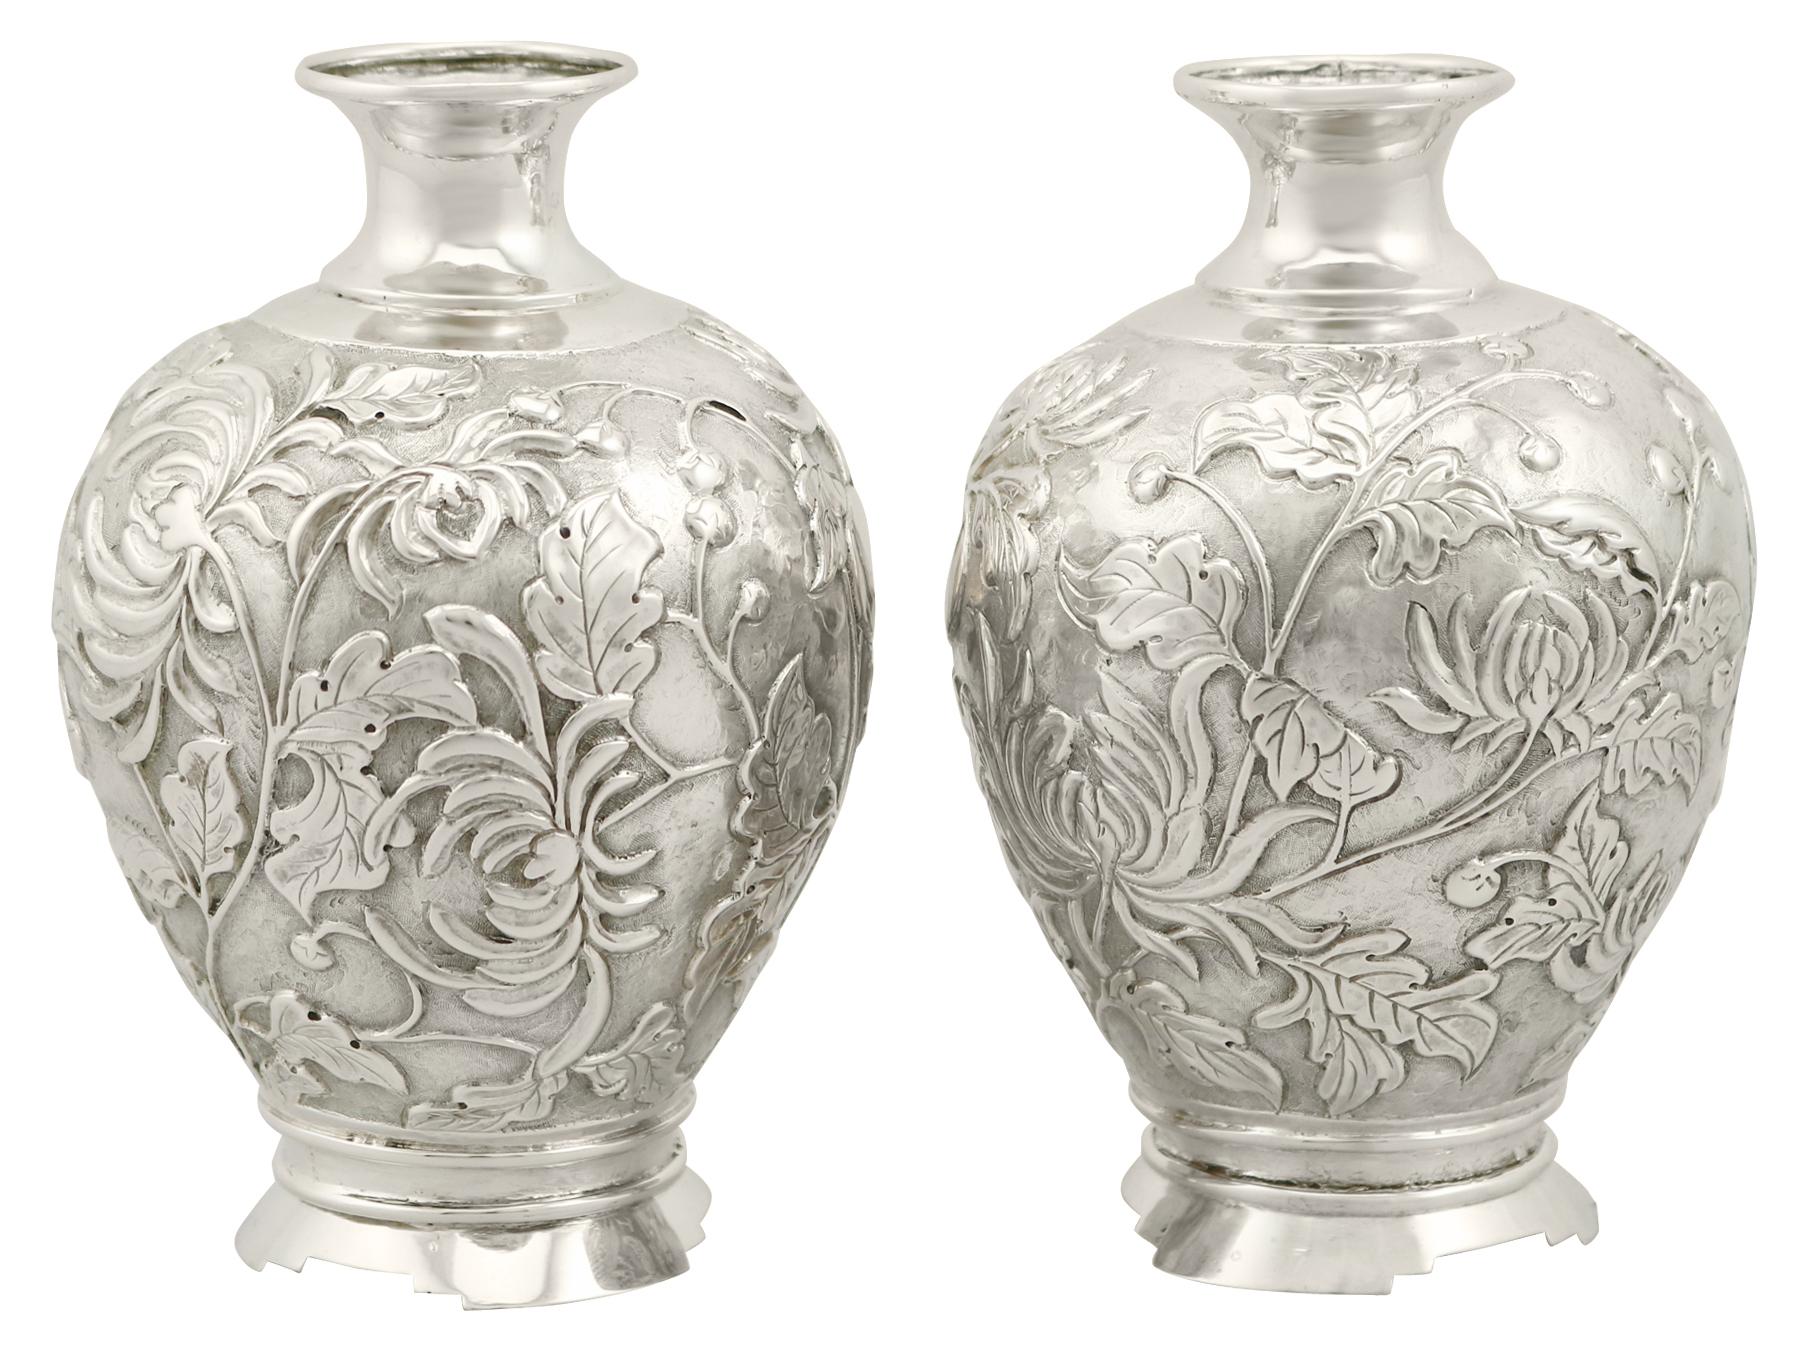 An exceptional, fine and impressive pair of antique Japanese silver bud vases; an addition to our antique Asian silverware collection.

These exceptional antique Japanese silver vases have a circular rounded form with a waisted neck.

The body